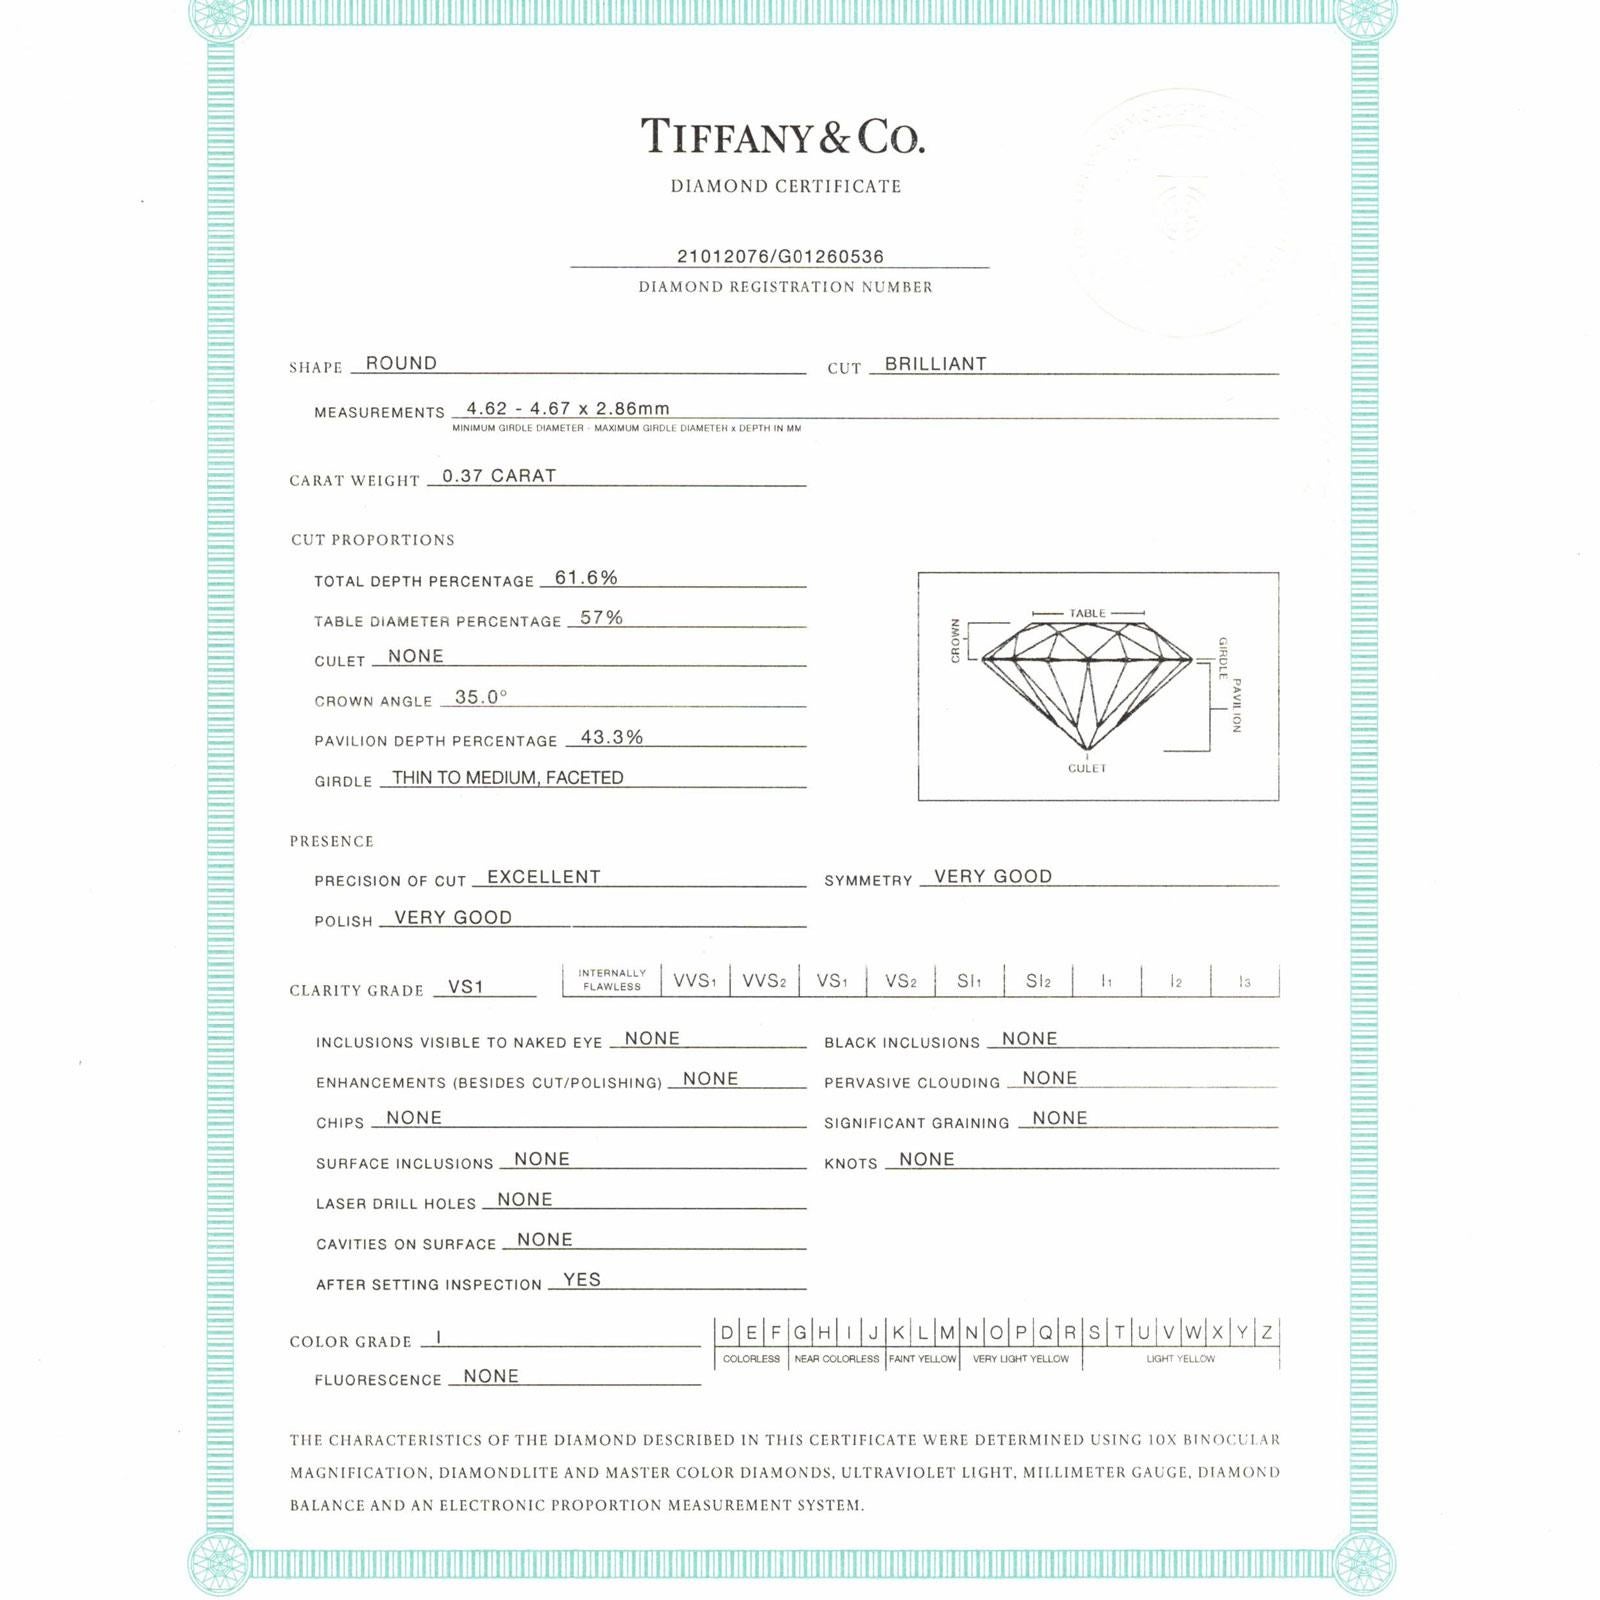 Tiffany & Co. Diamond Platinum Solitaire Engagement Ring Box & Papers, 2005 1